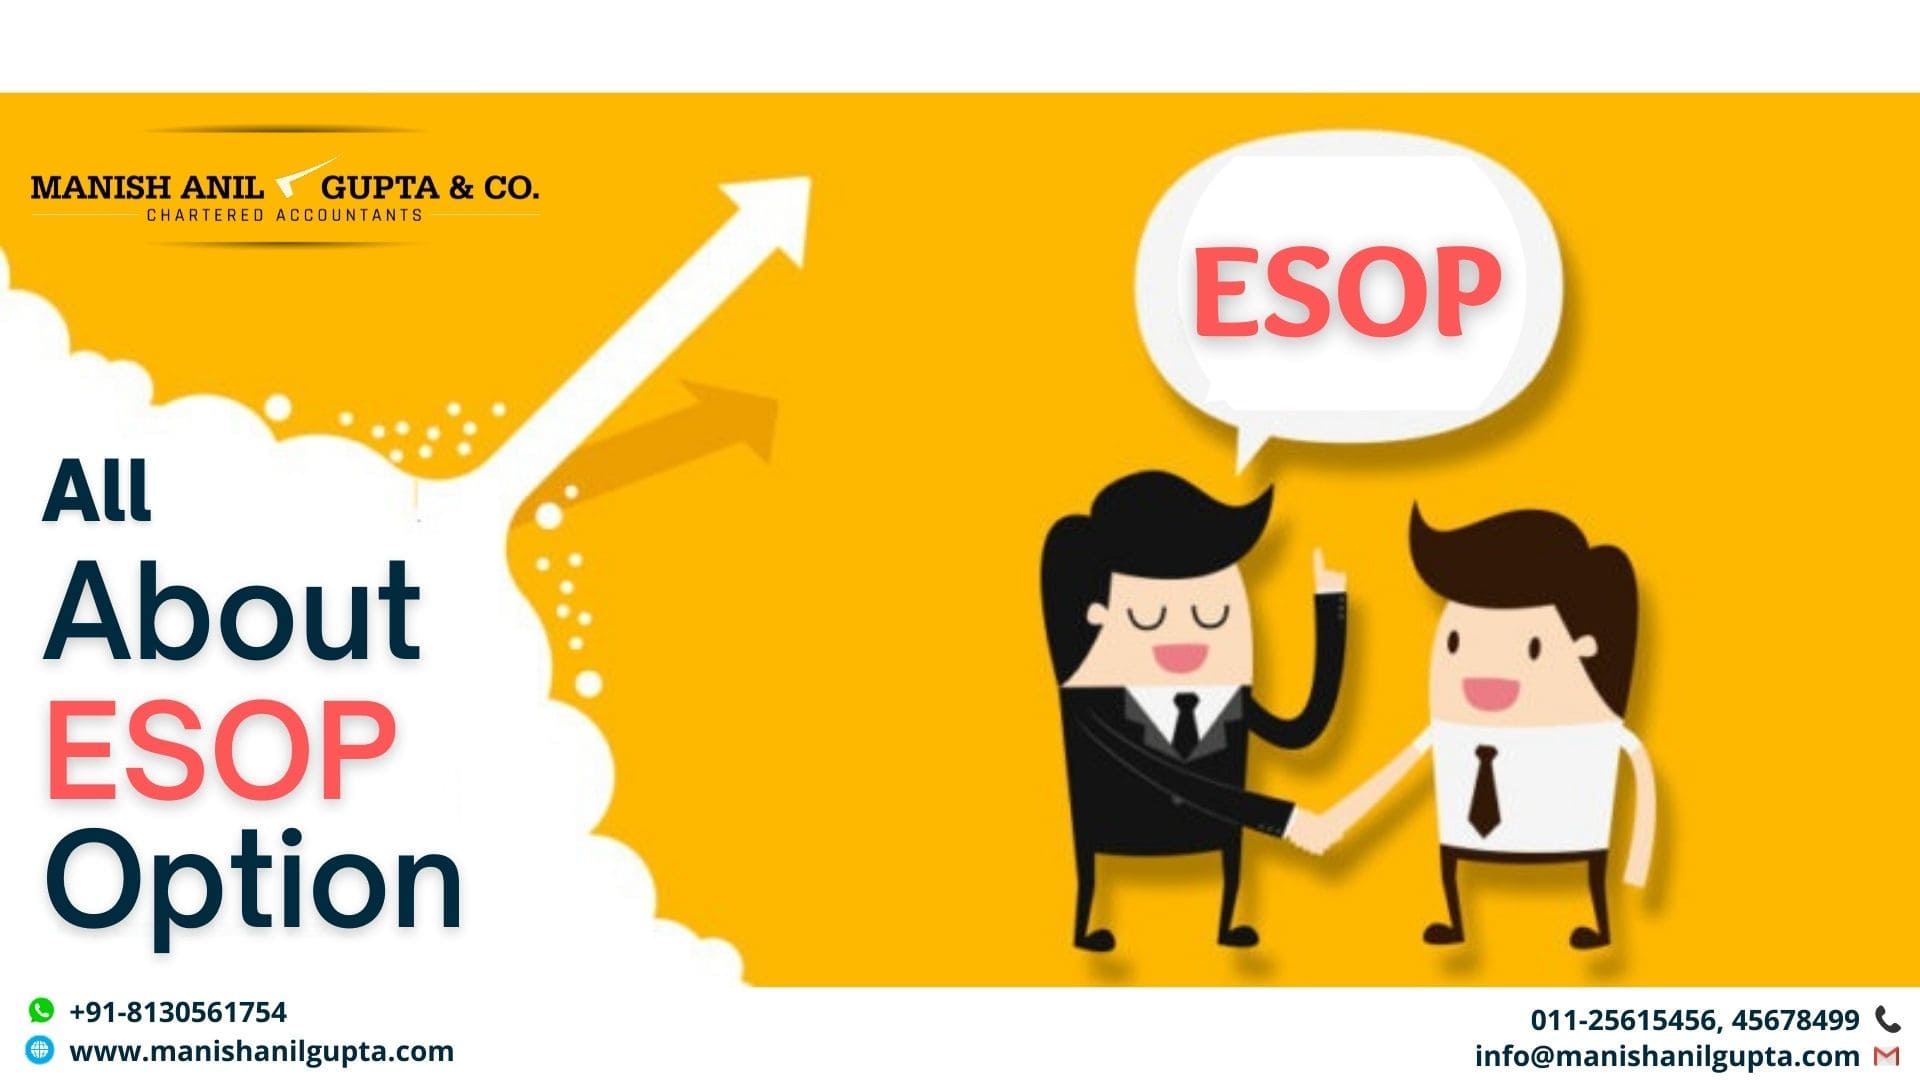 All ABOUT ESOP OPTION